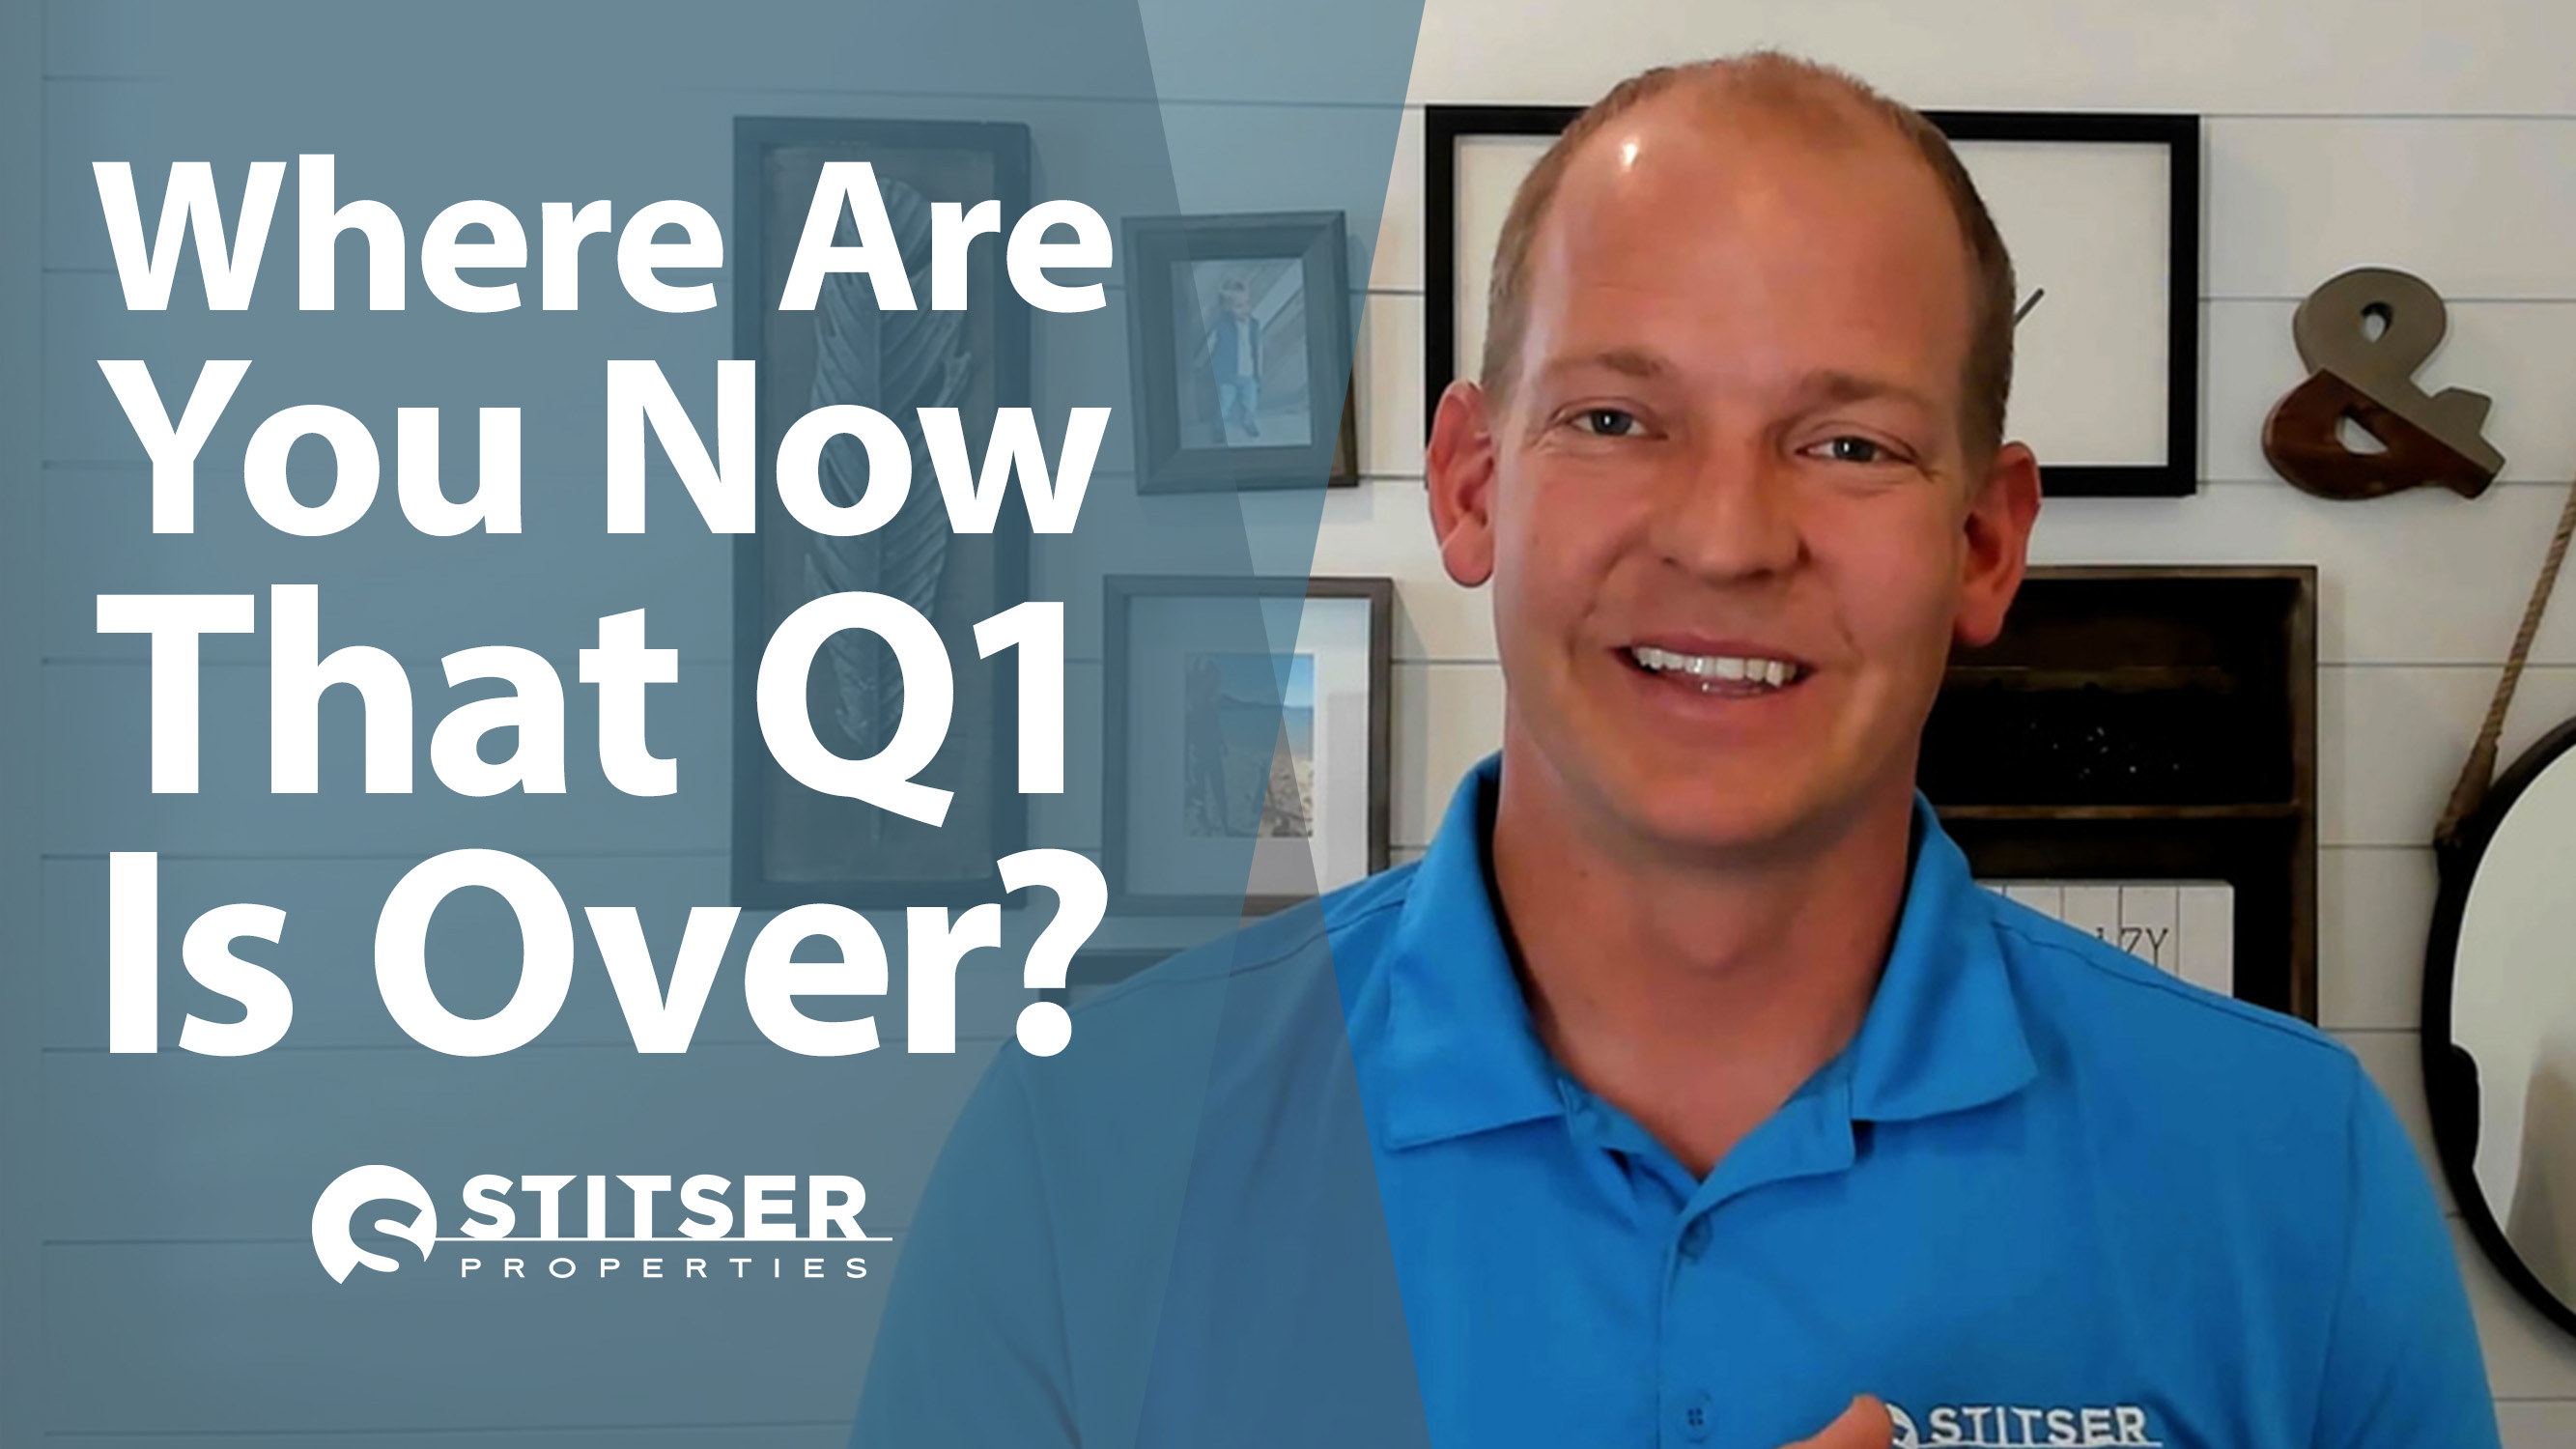 Your 2021 Goals Can Be Met! How To Prep For a Great Q2